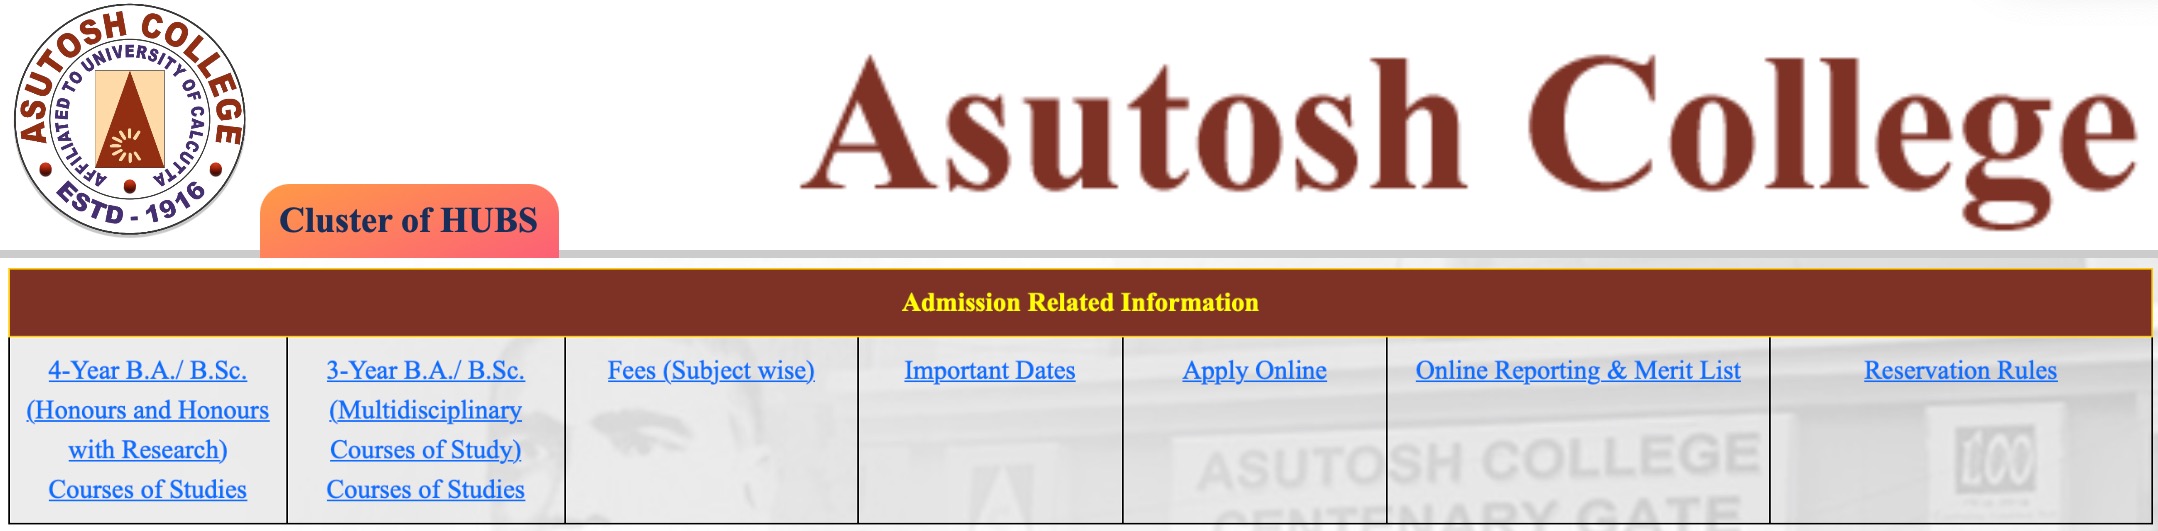 Asutosh College Admission Details Check